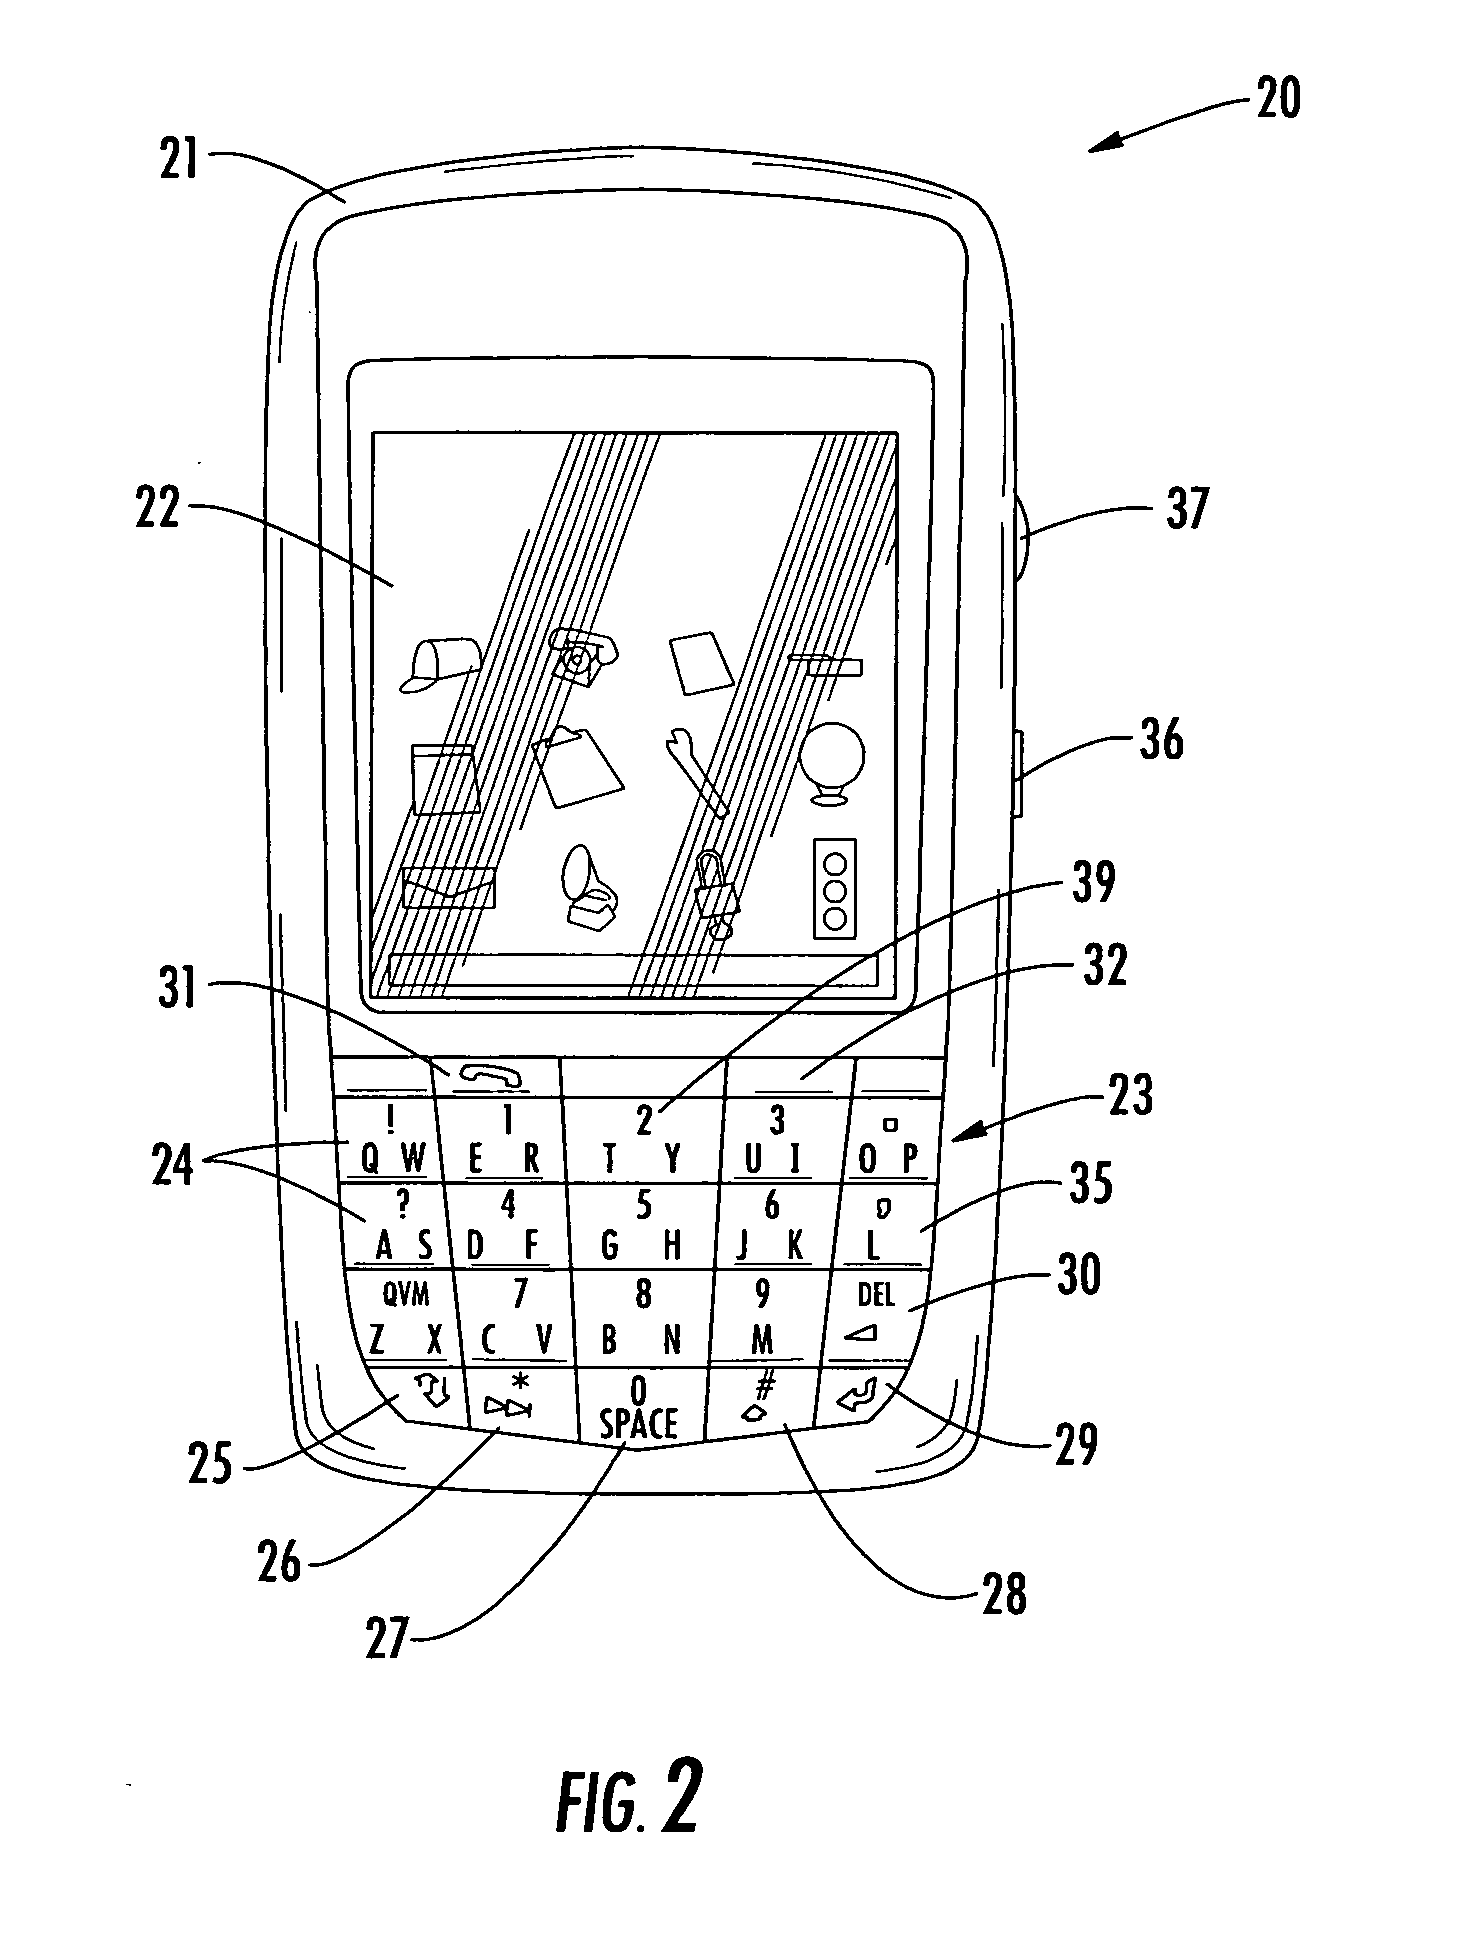 Mobile wireless communications device having low-if receiver circuitry that adapts to radio environment